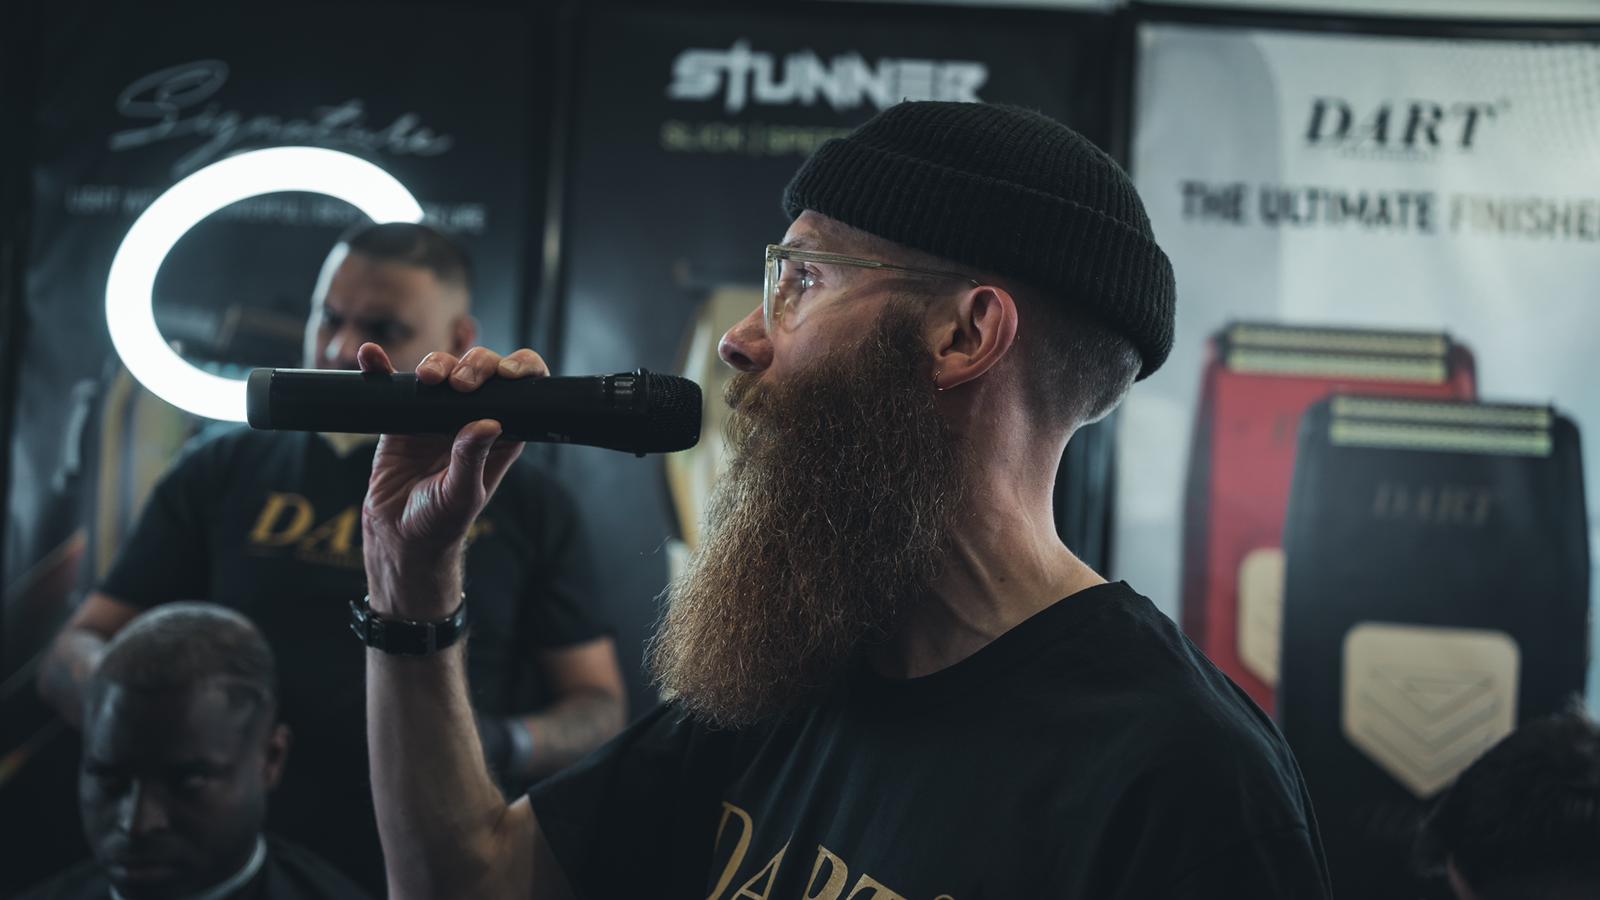 Simon butcher master barber onesociety one society best beard beard care big beard beard styling hair cut master barber connect great British barber bash